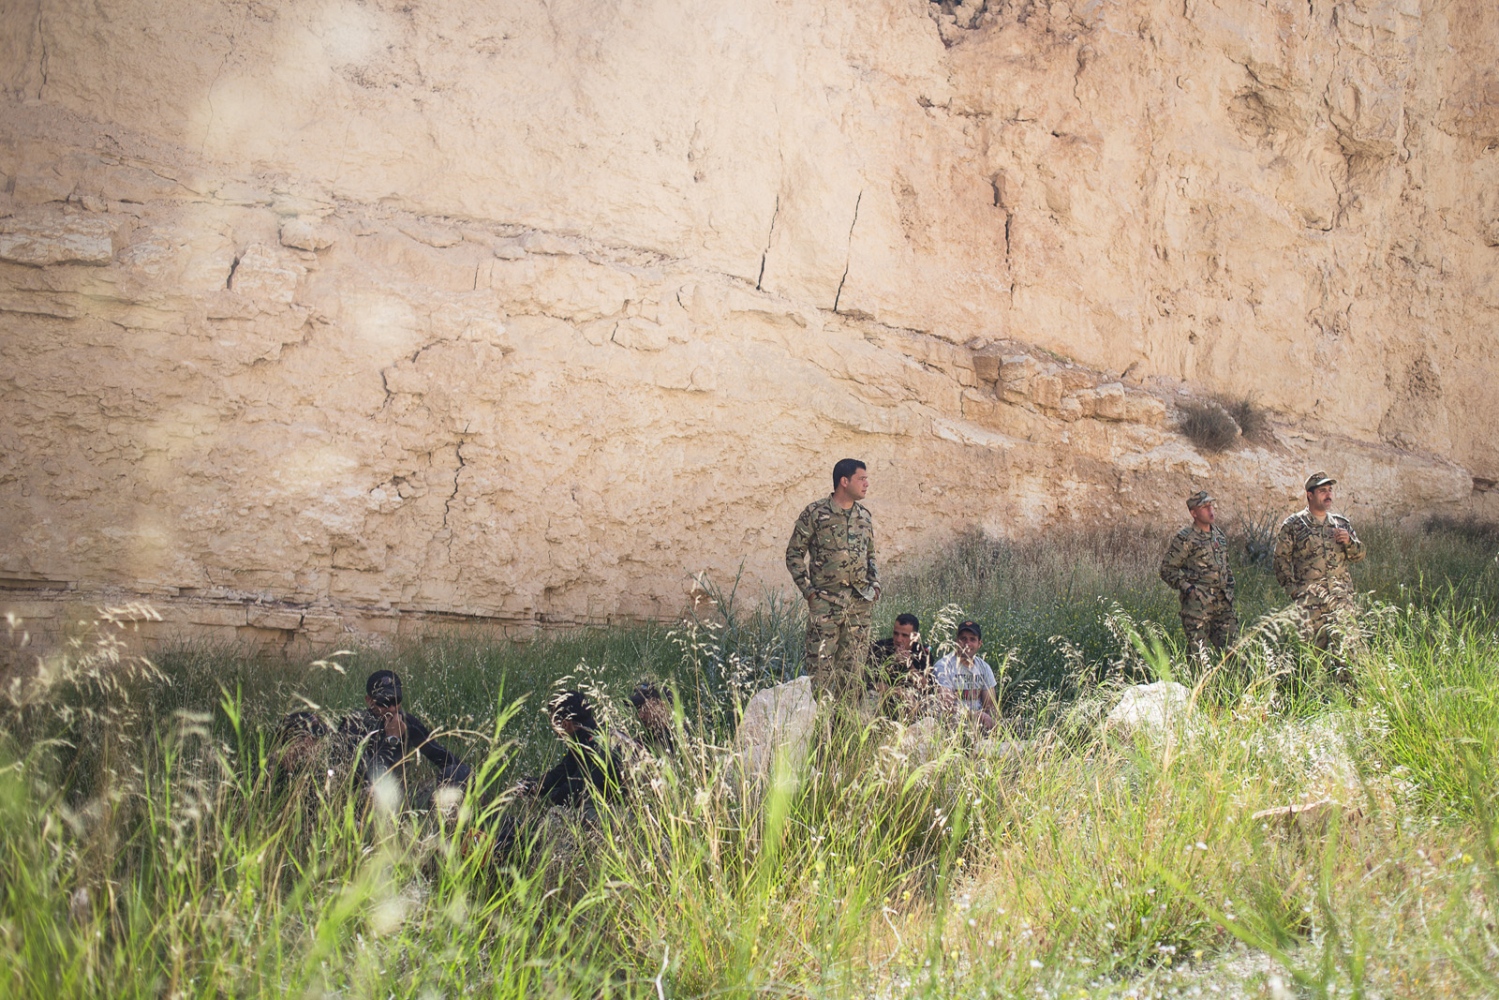  The Jordanian team rests in the shade of a sandstone cliff before the "urban assault" event at the Warrior Competition on April 21, 2015. In this event, soldiers must rush over a dirt verge, storm a building in a mock city, rescue a hostage and fire